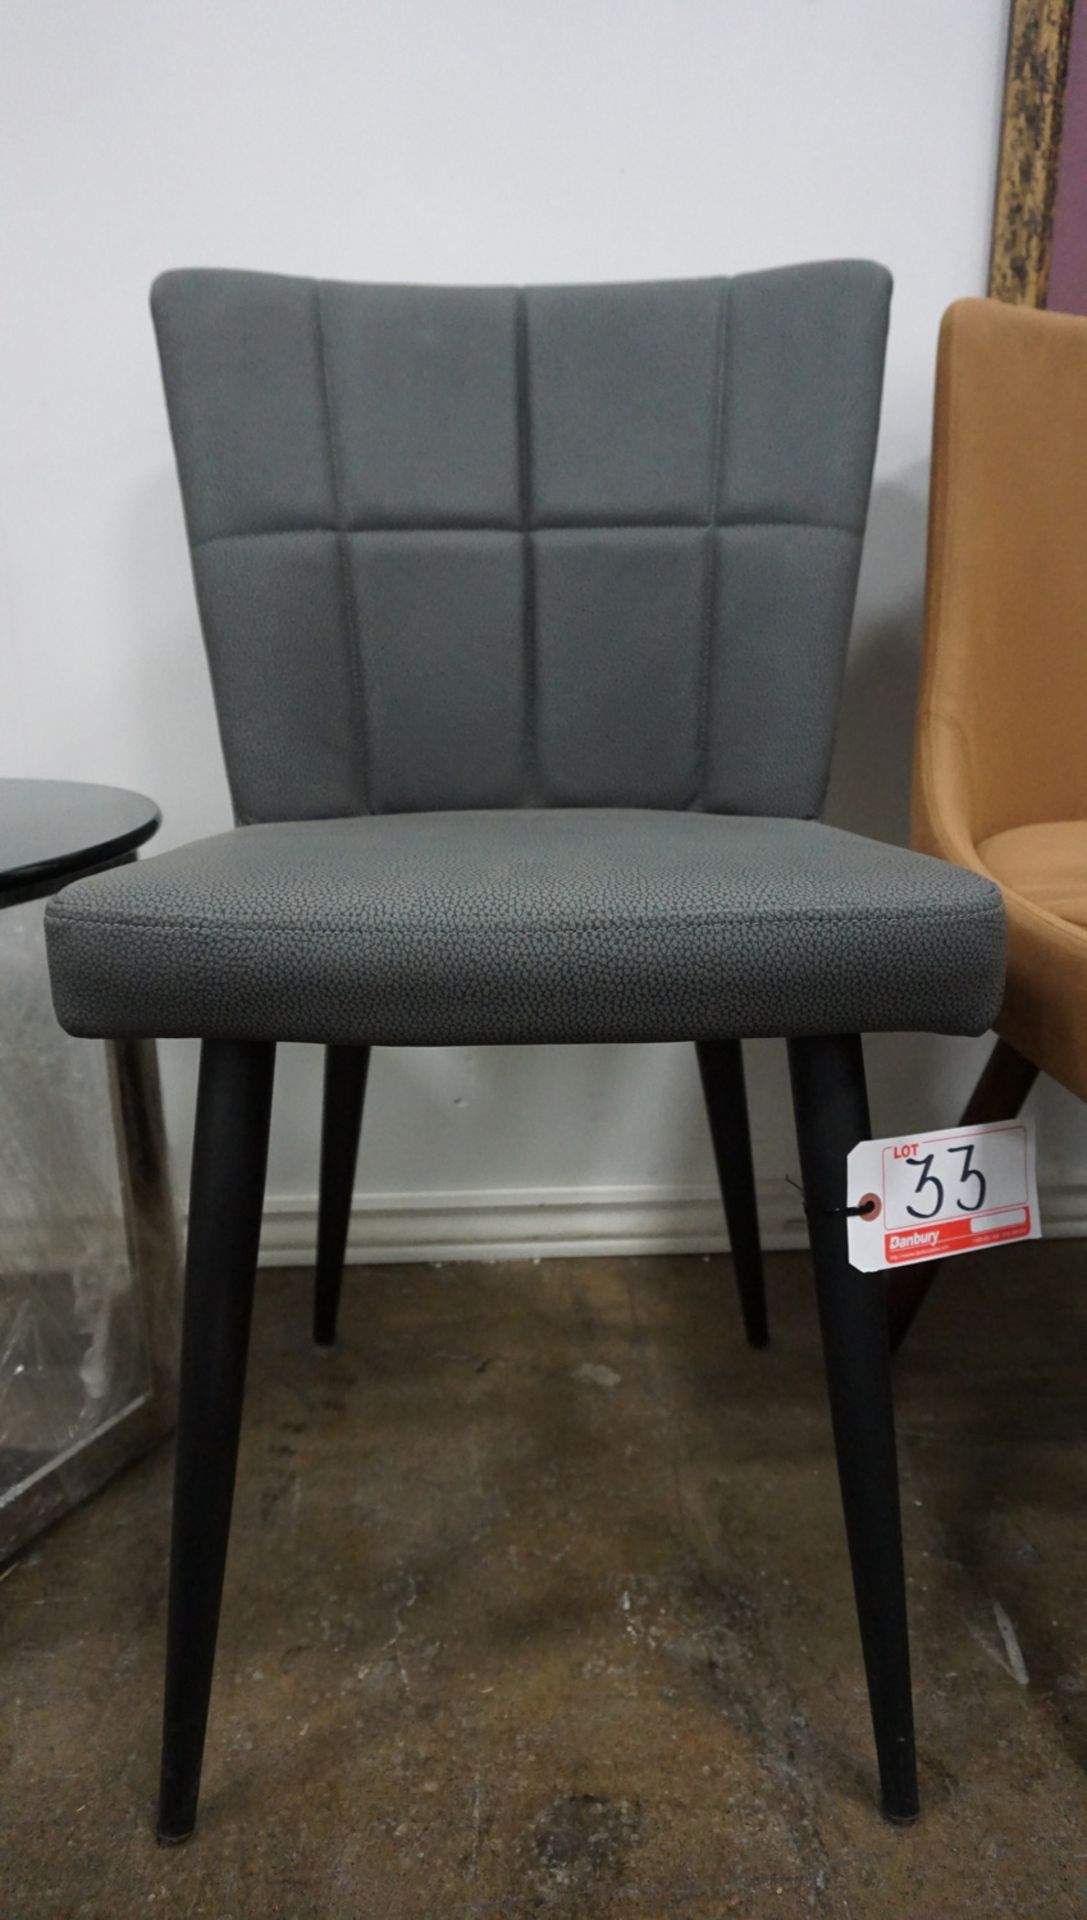 UNITS - DARK GREY PU LEATHER W/ CHECKER TOP STITCHING DINING CHAIRS W/ BLACK METAL LEGS (414- - Image 2 of 2